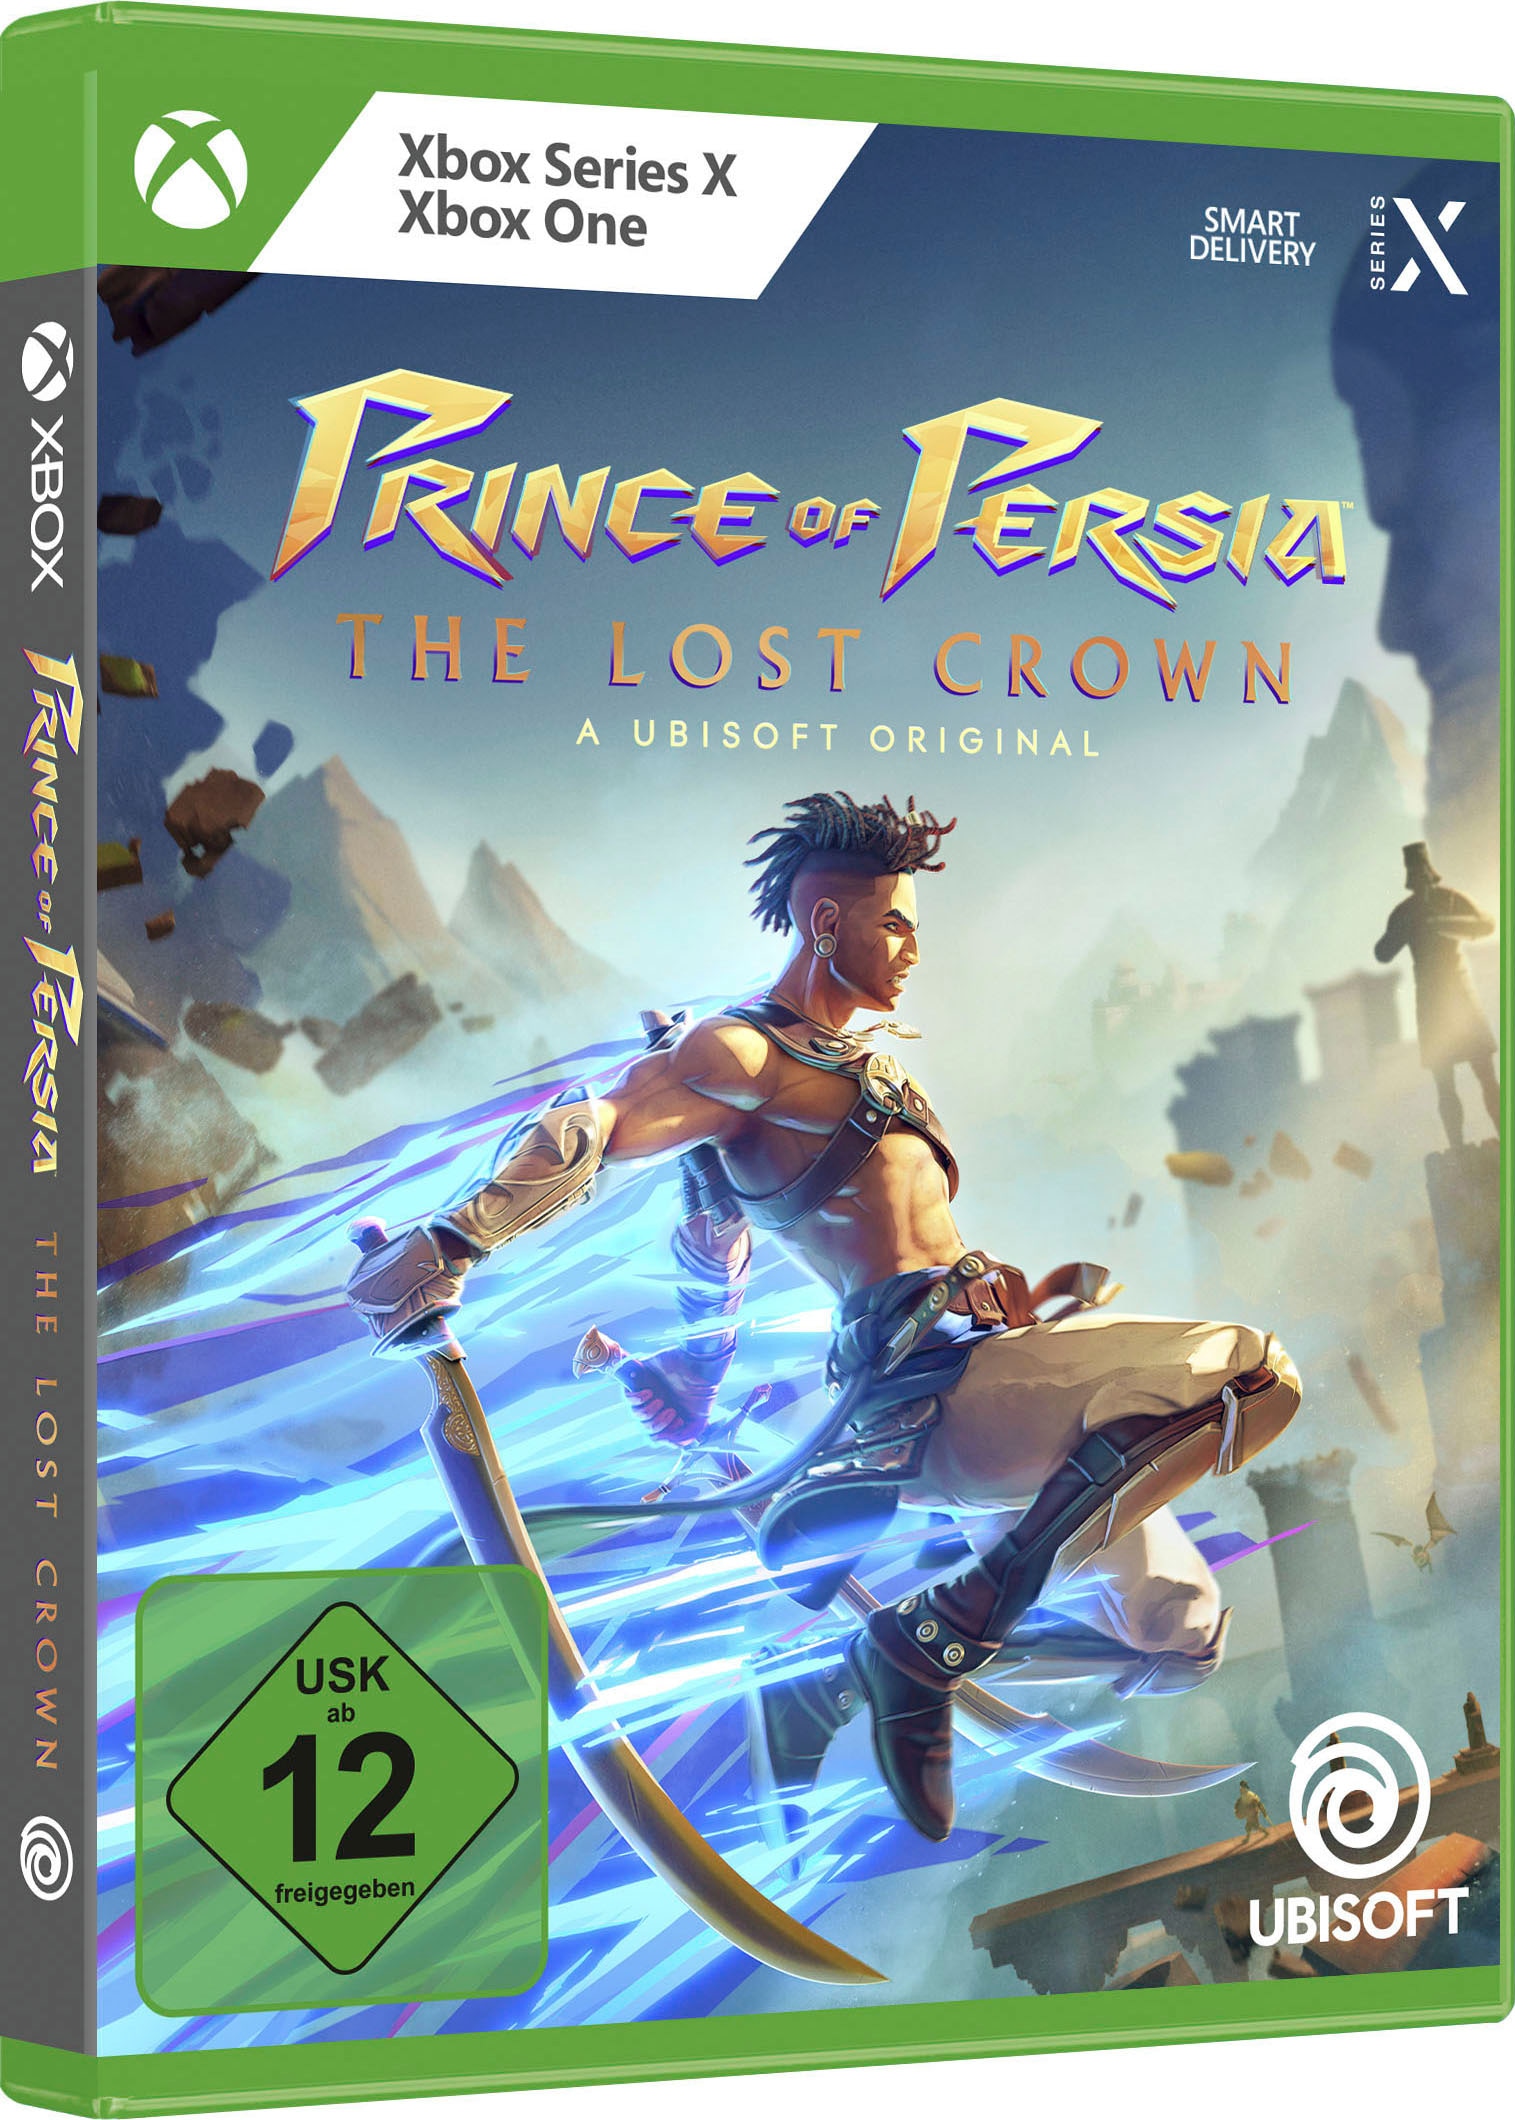 UBISOFT Spielesoftware »Xbox One Prince of Persia: The Lost Crown (Smart Delivery)«, Xbox One